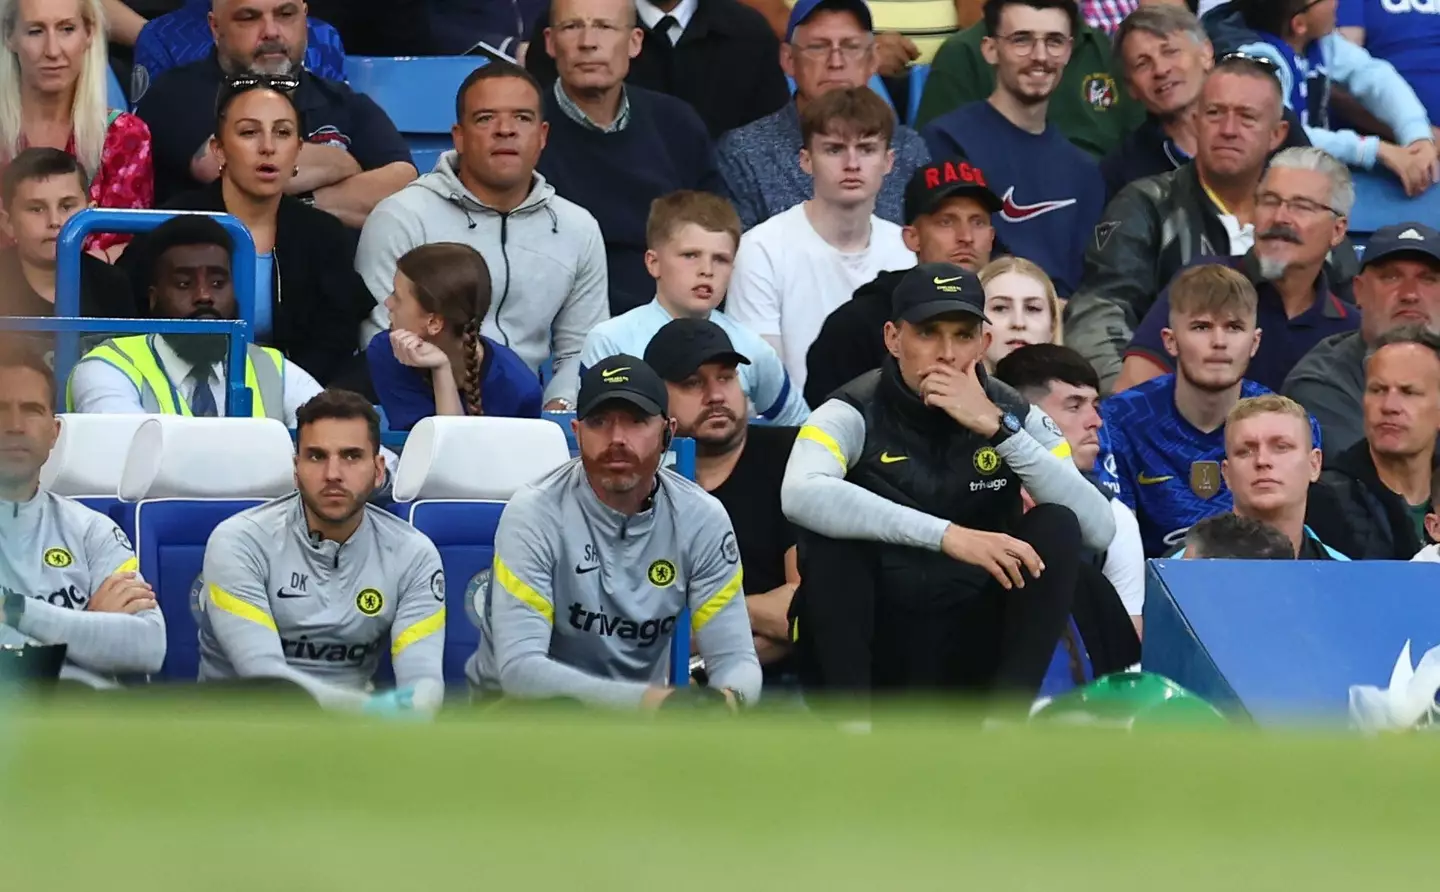 homas Tuchel manager of Chelsea during the Premier League match at Stamford Bridge, London. (Alamy)